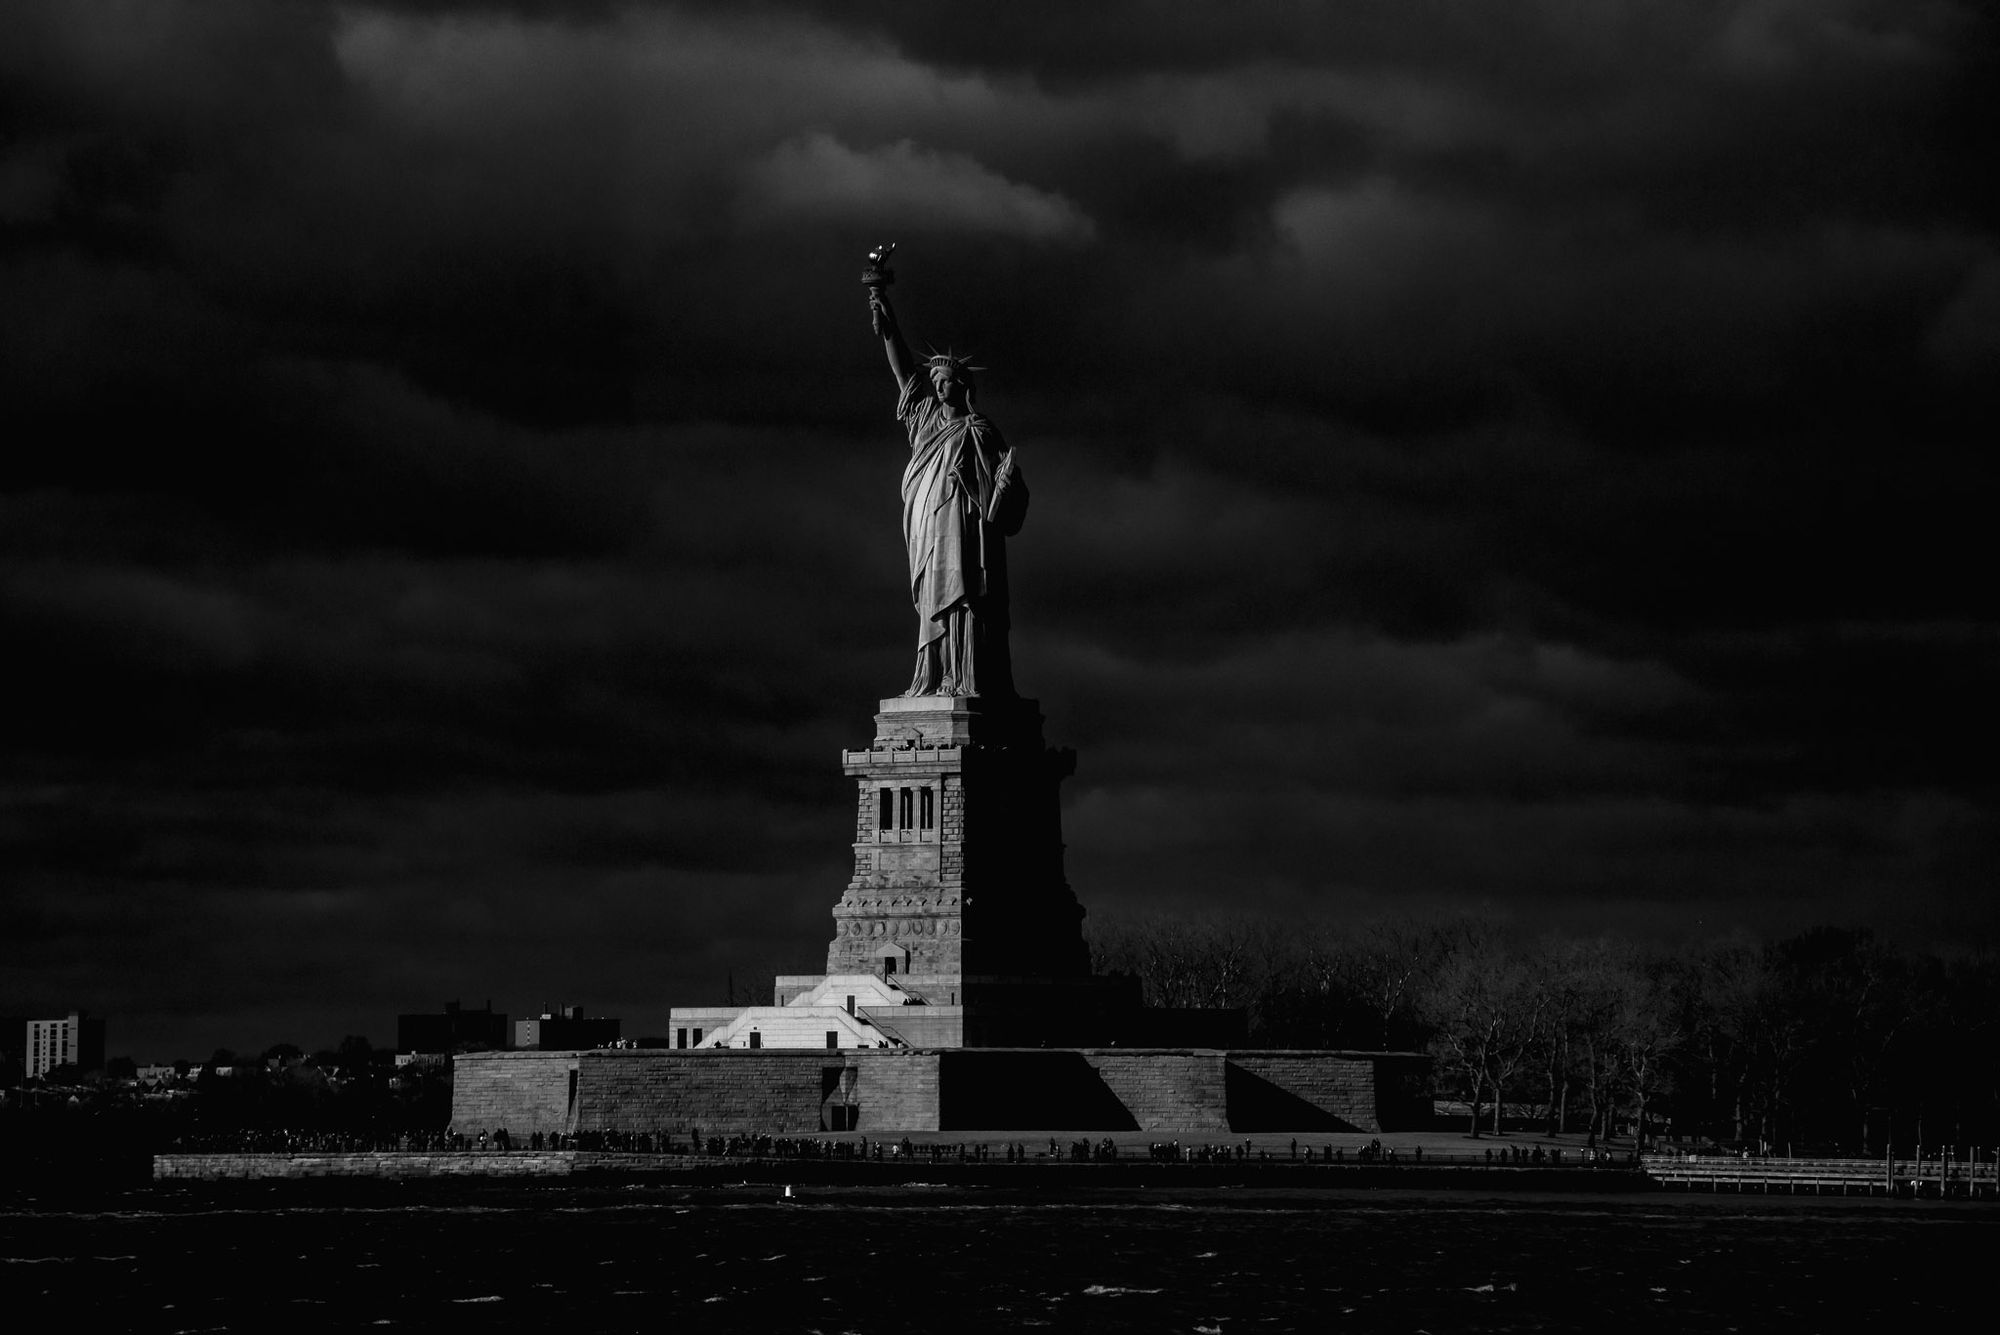 A black and white photo of the Statue of Liberty against a dark sky.